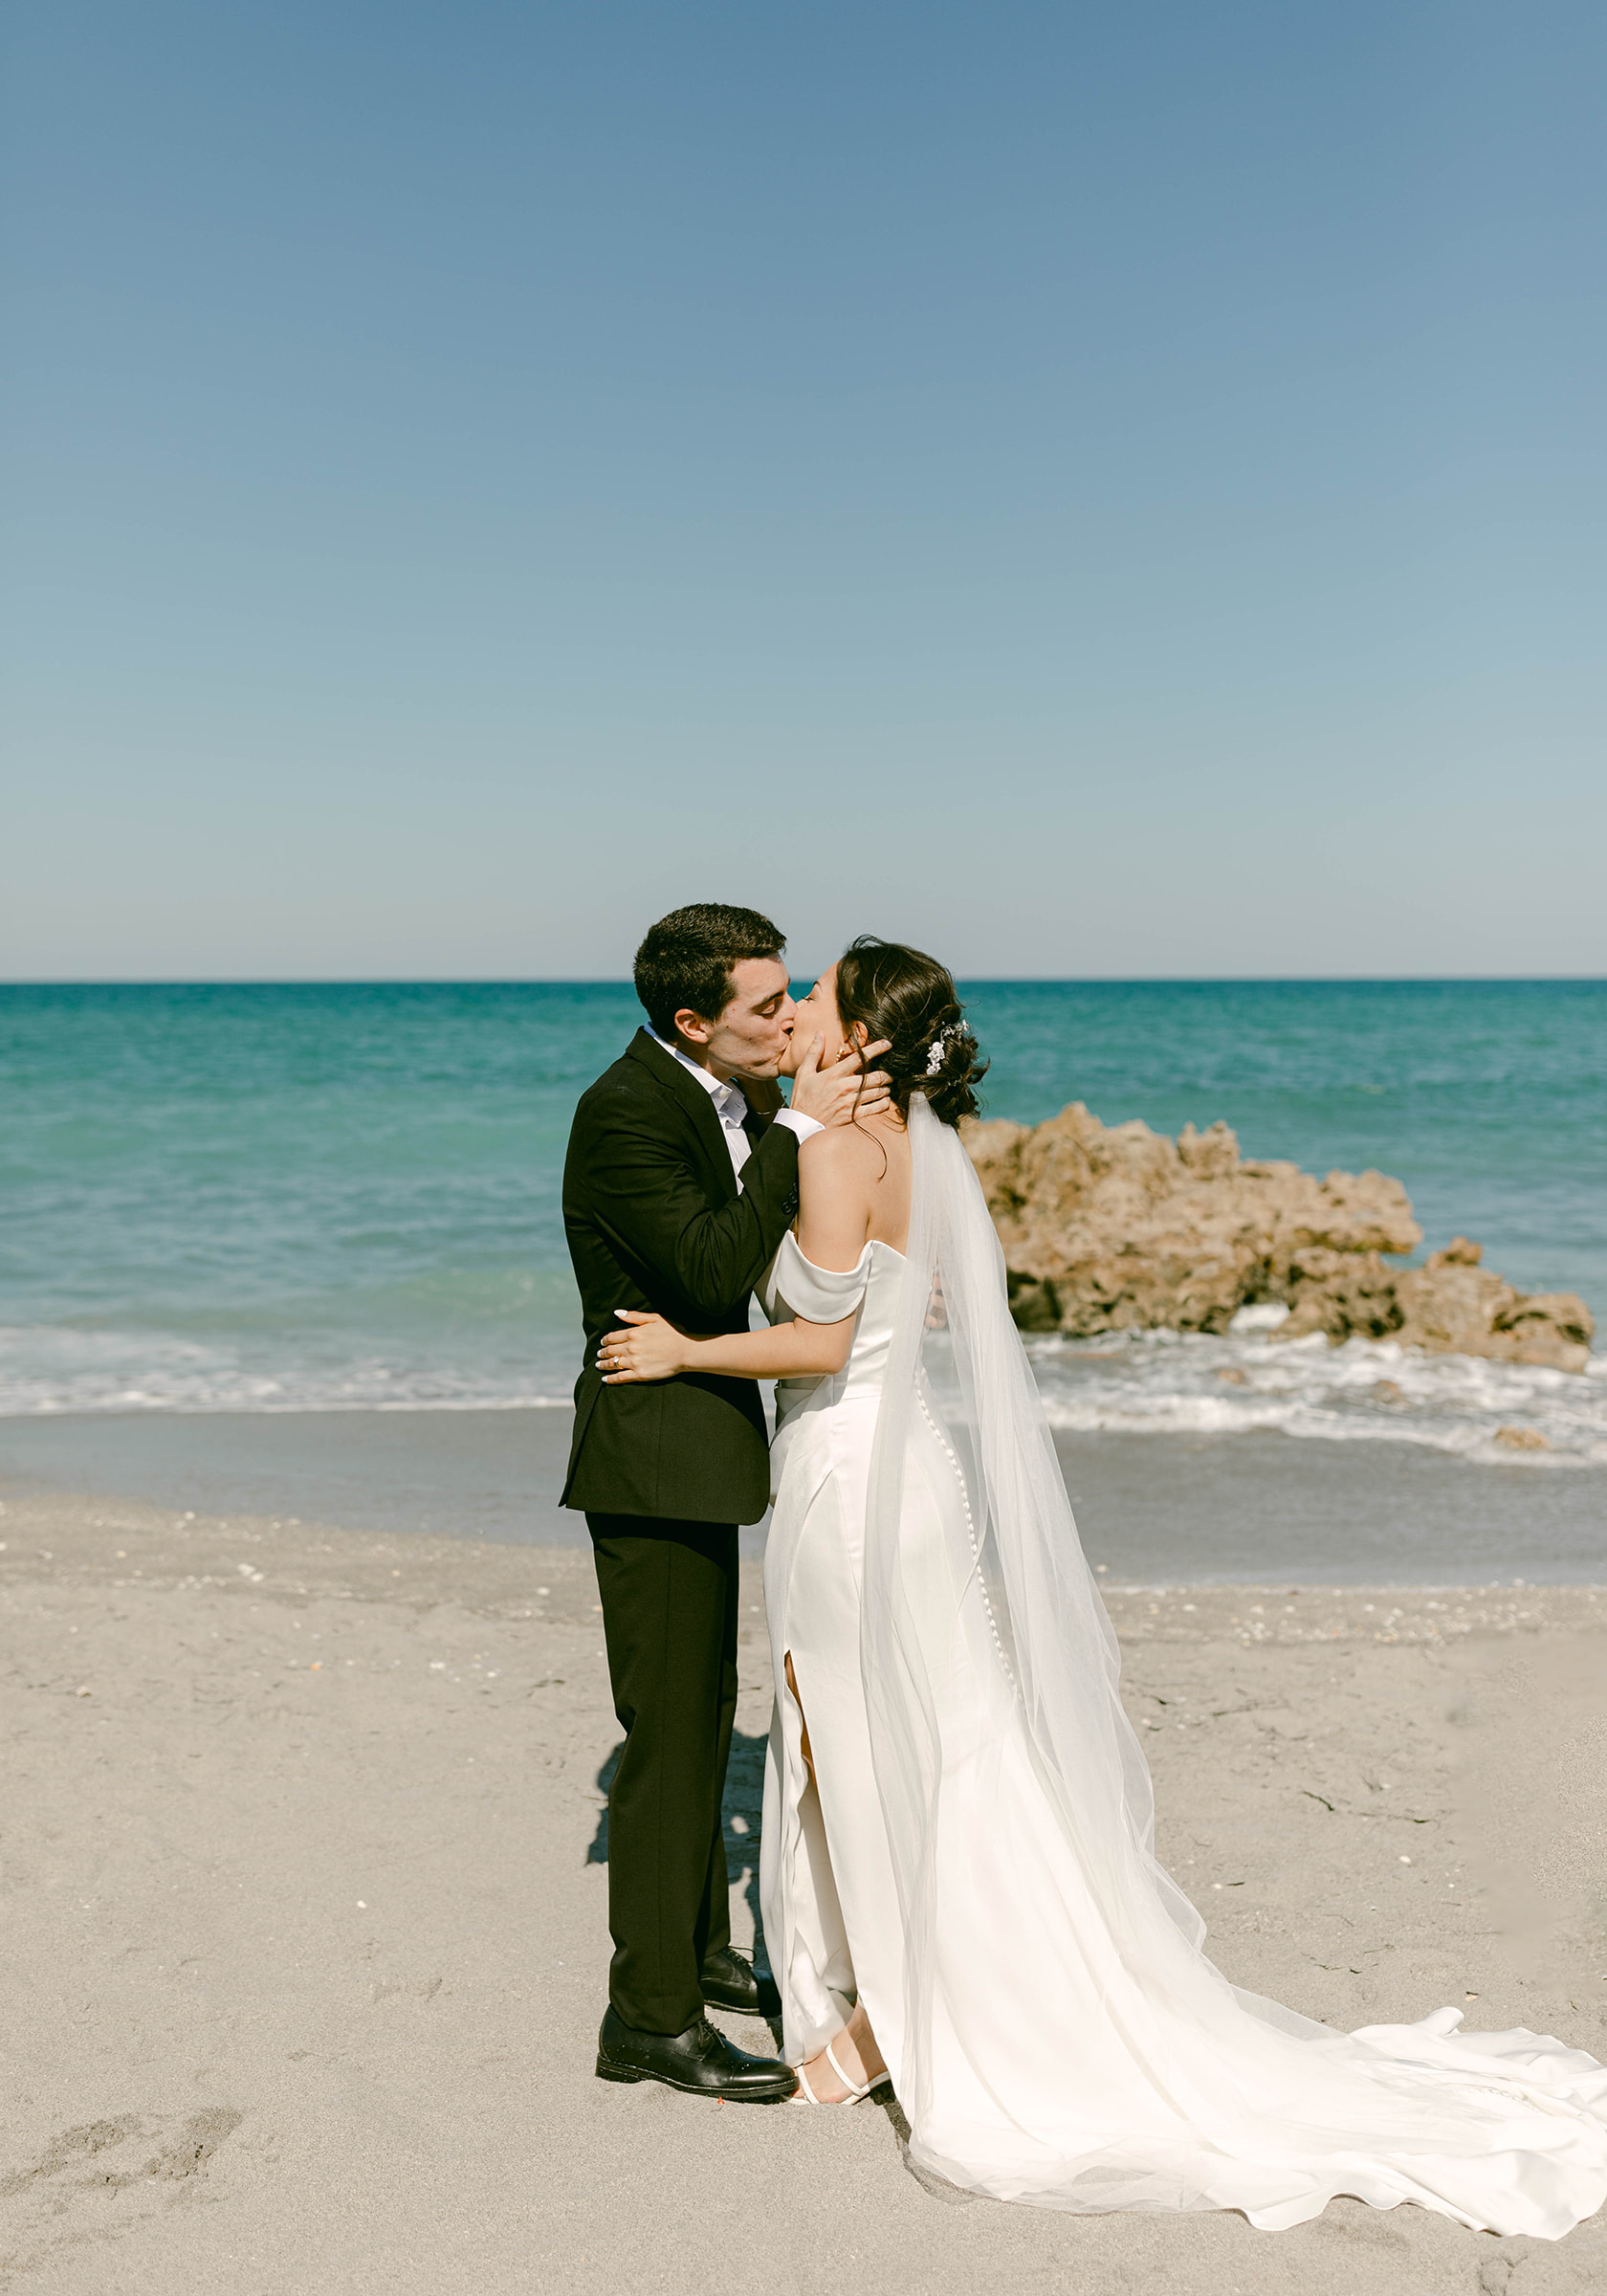 Couple shares first kiss on the beach in Palm Beach following their intimate wedding ceremony